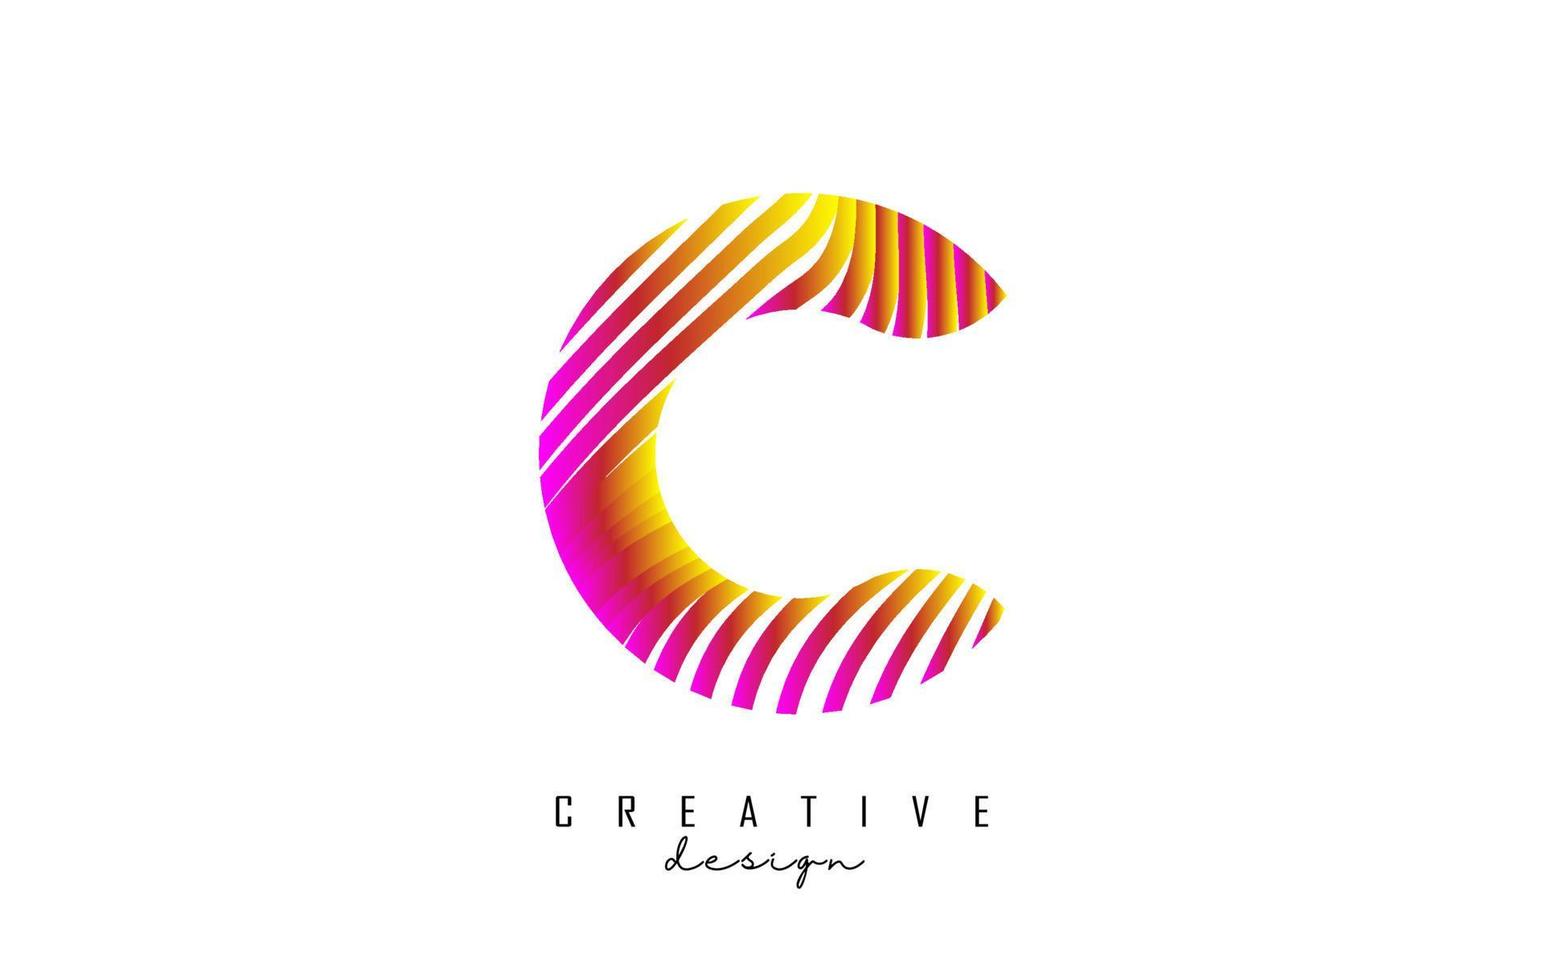 Letter C logo with vibrant colourful twisted lines. Creative vector illustration with zebra, finger print pattern lines.